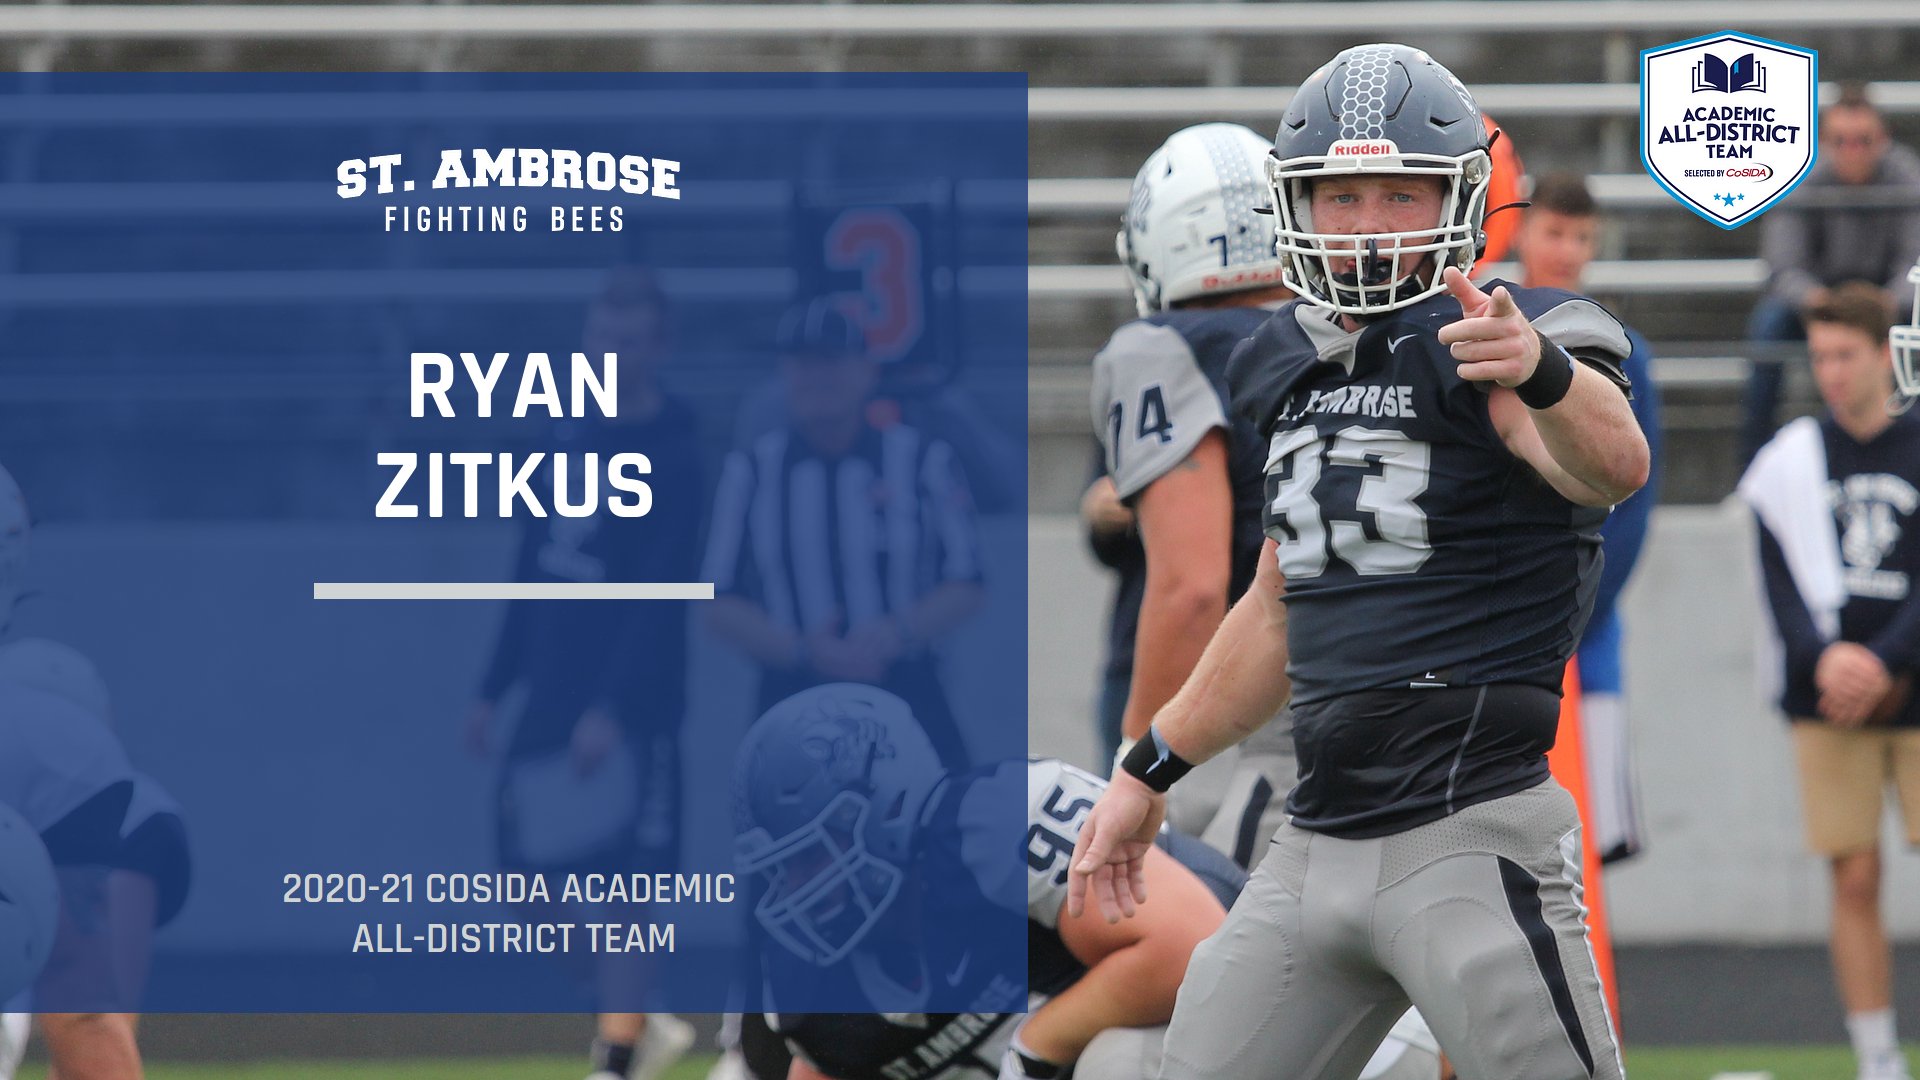 Zitkus named to CoSIDA Academic All-District Team